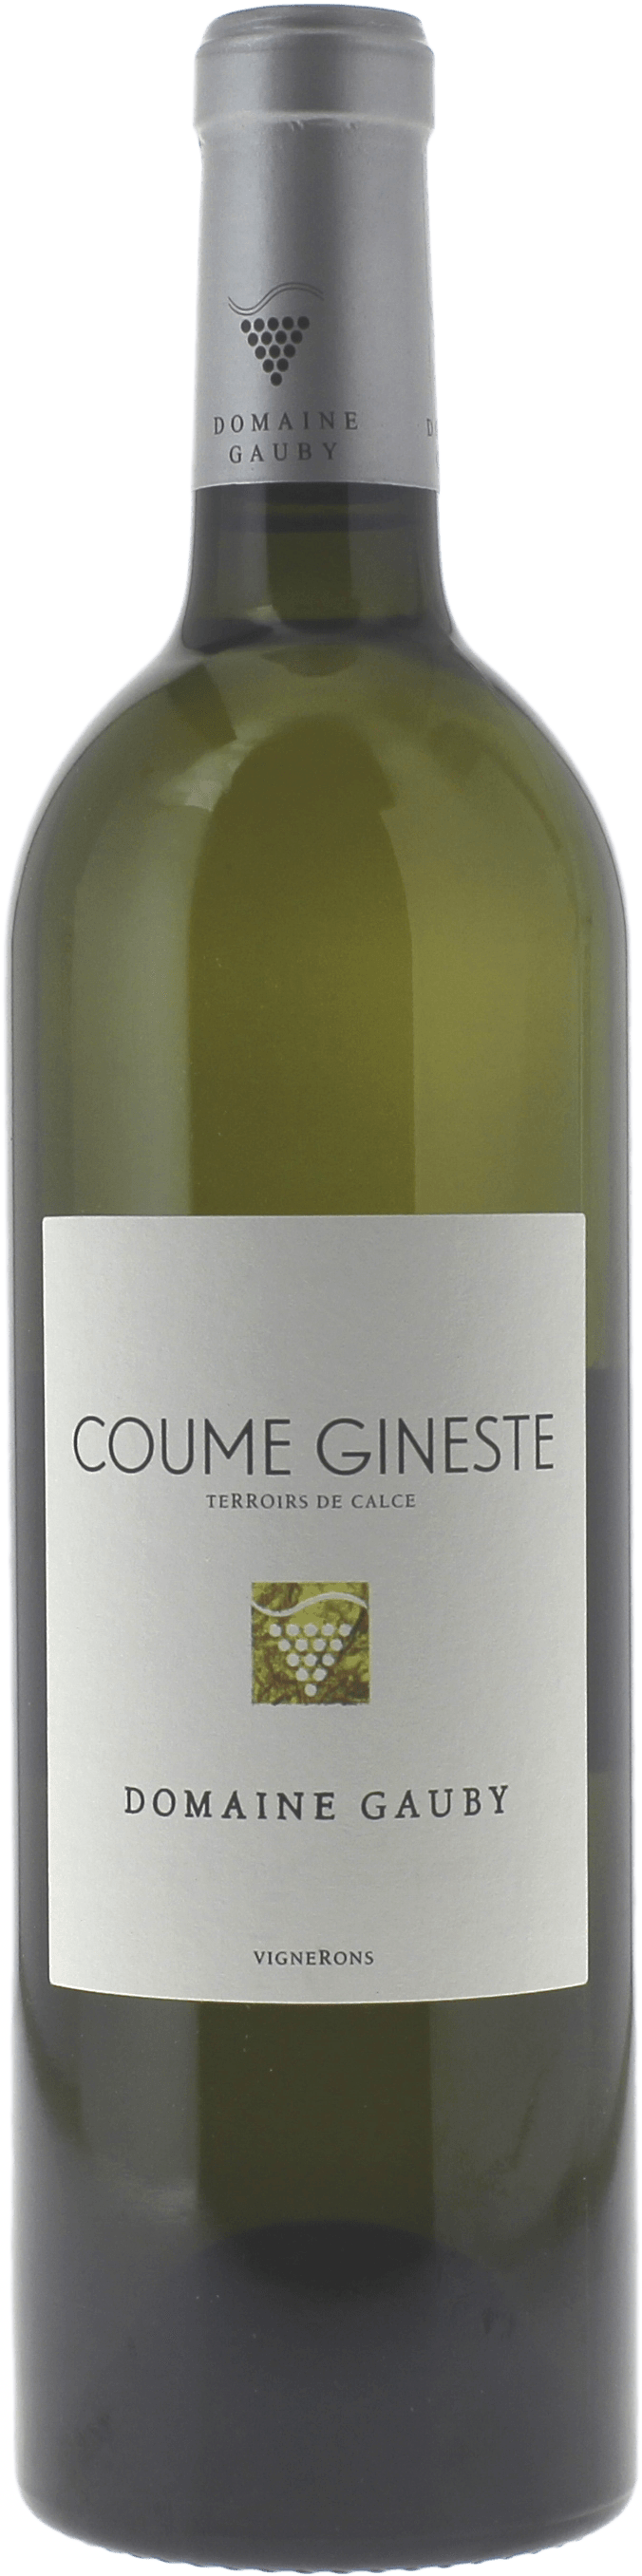 Gauby coume gineste blanc 2018  IGP Cotes catalanes, Roussillon